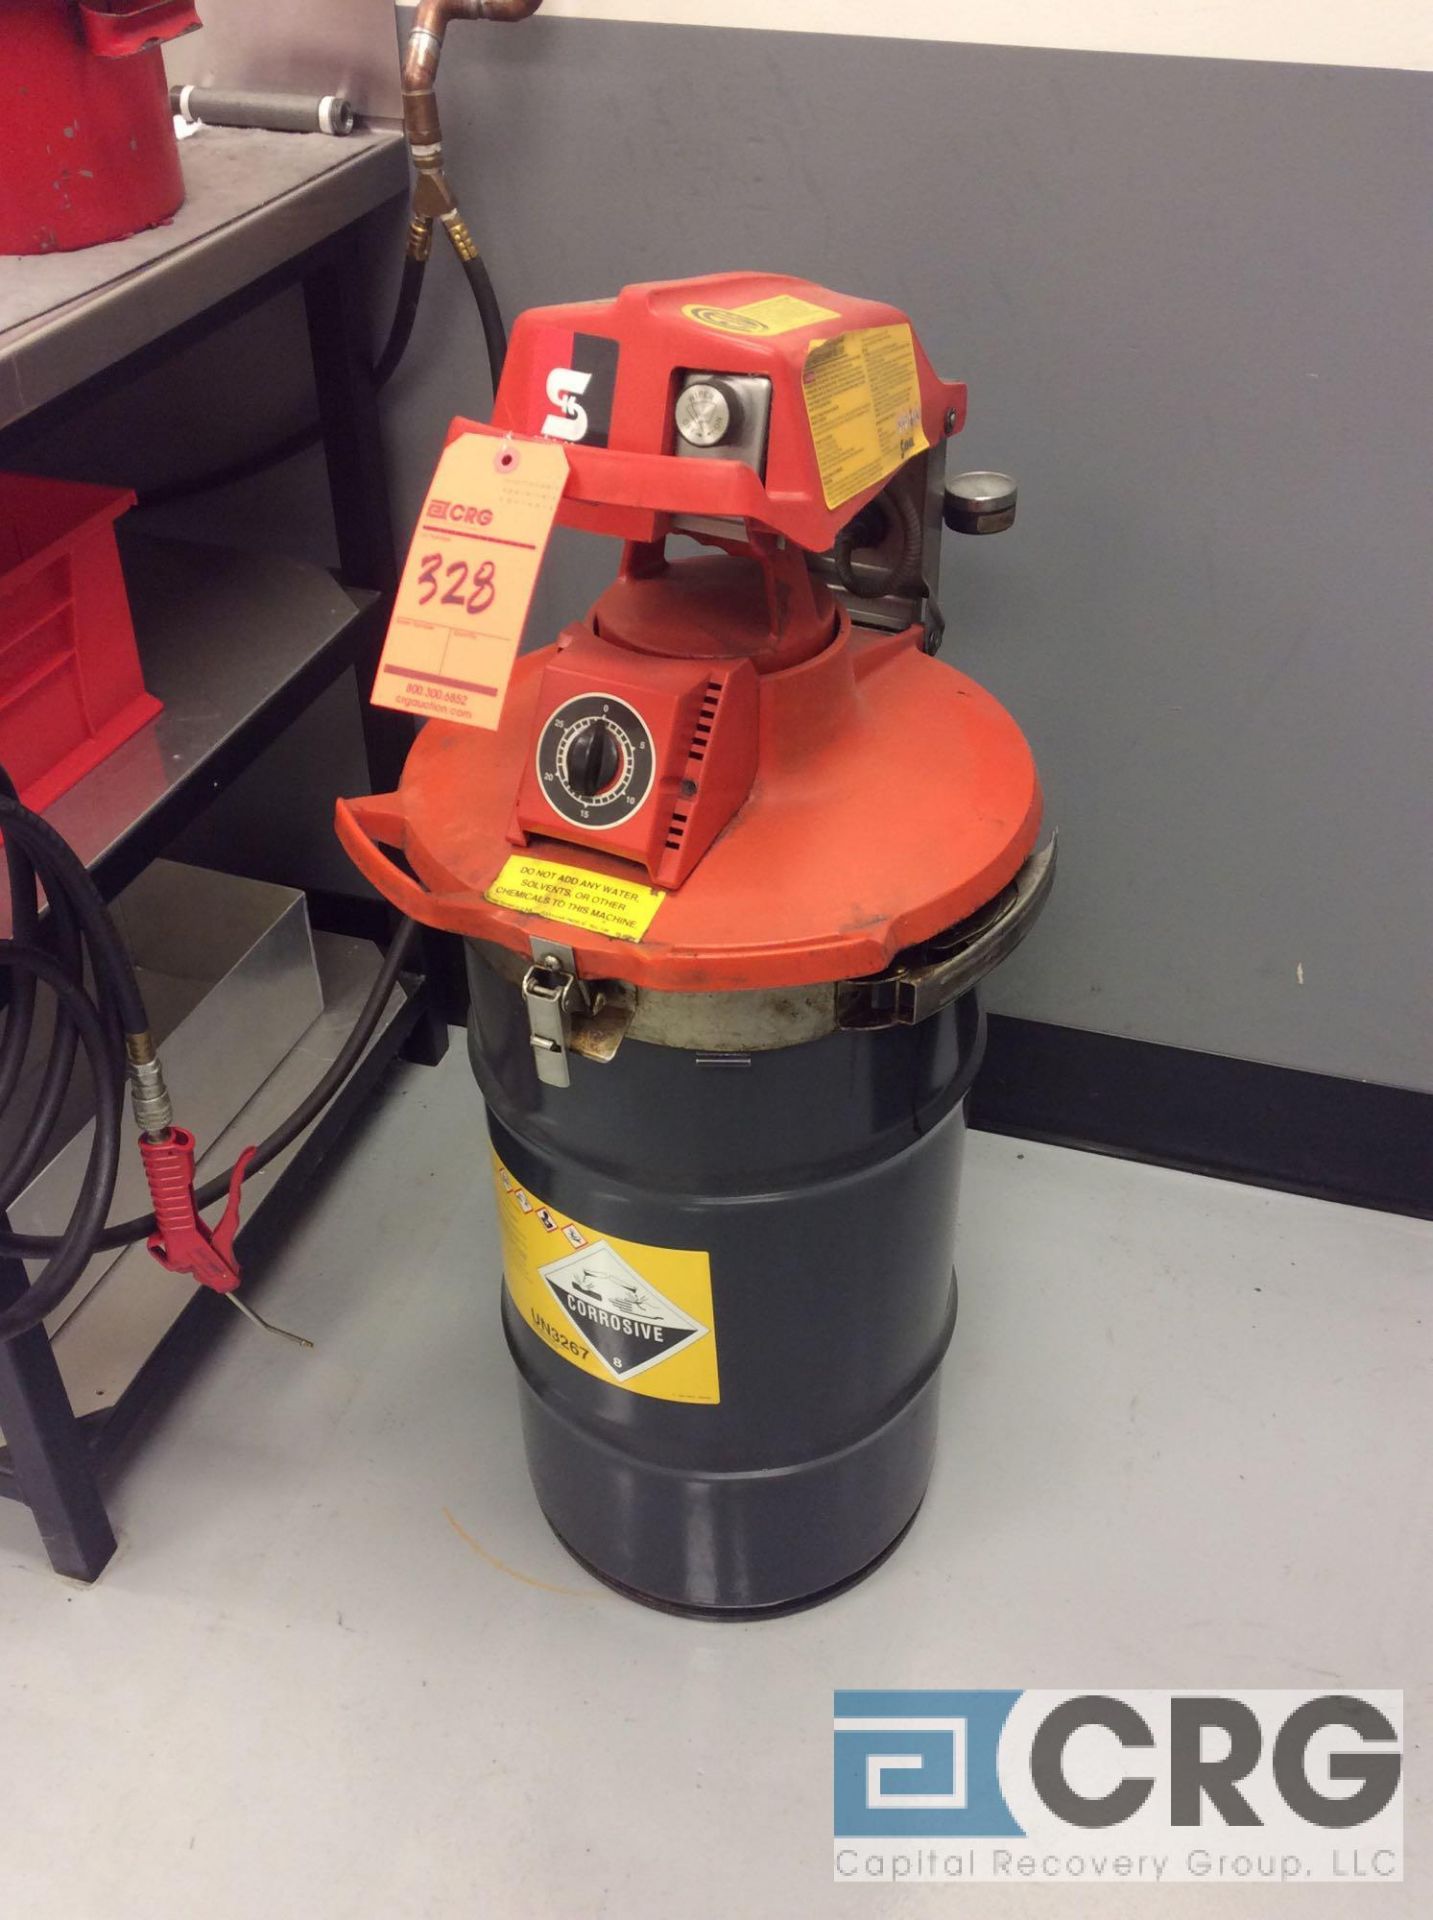 Safety Kleen Immersion and cold parts cleaner, mn 11 (LOCATED IN BLDG 1 DISASSEMBLY DEPT)